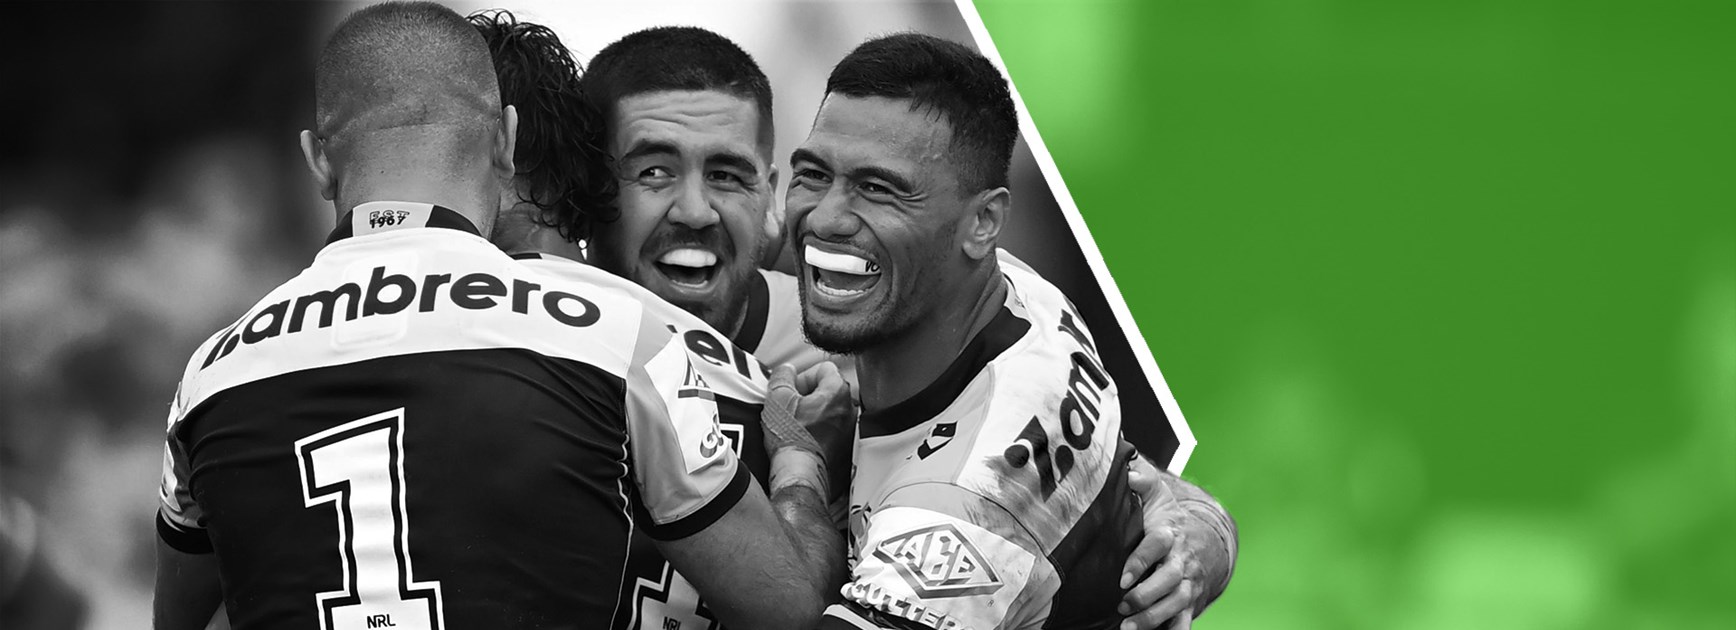 NRL Tipping: Expert tips for Round 18